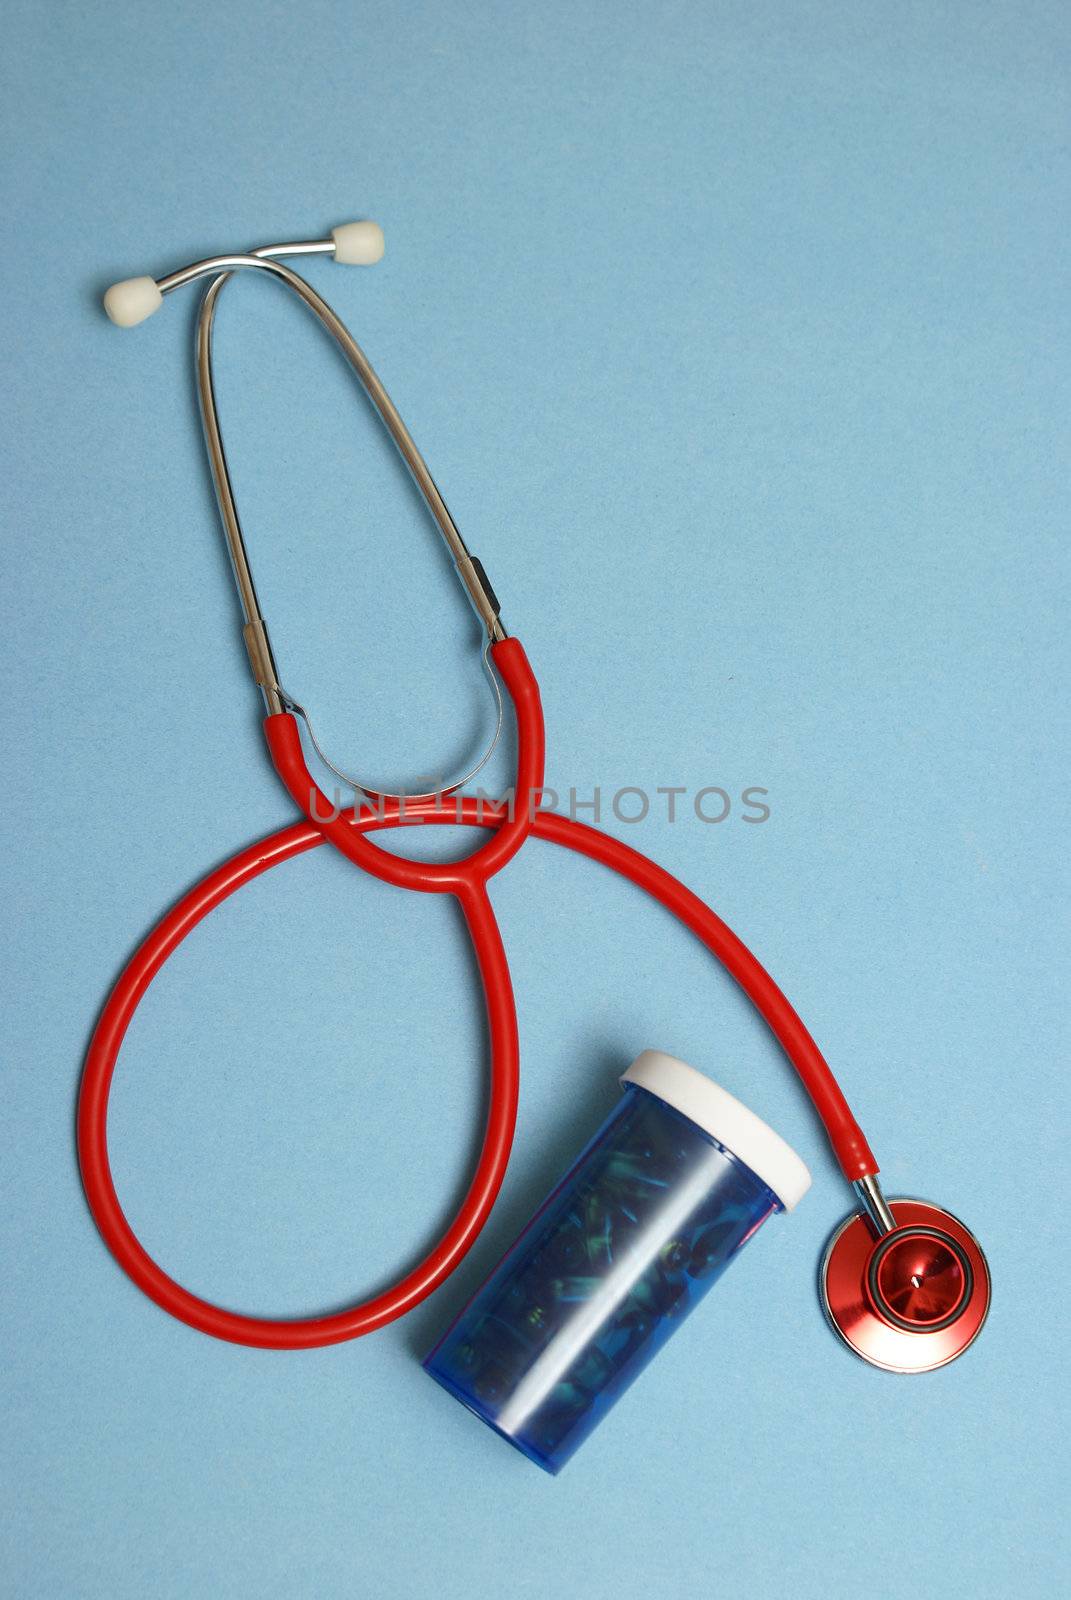 A stethoscope and pill bottle to remedy many medical treatments for the patient.